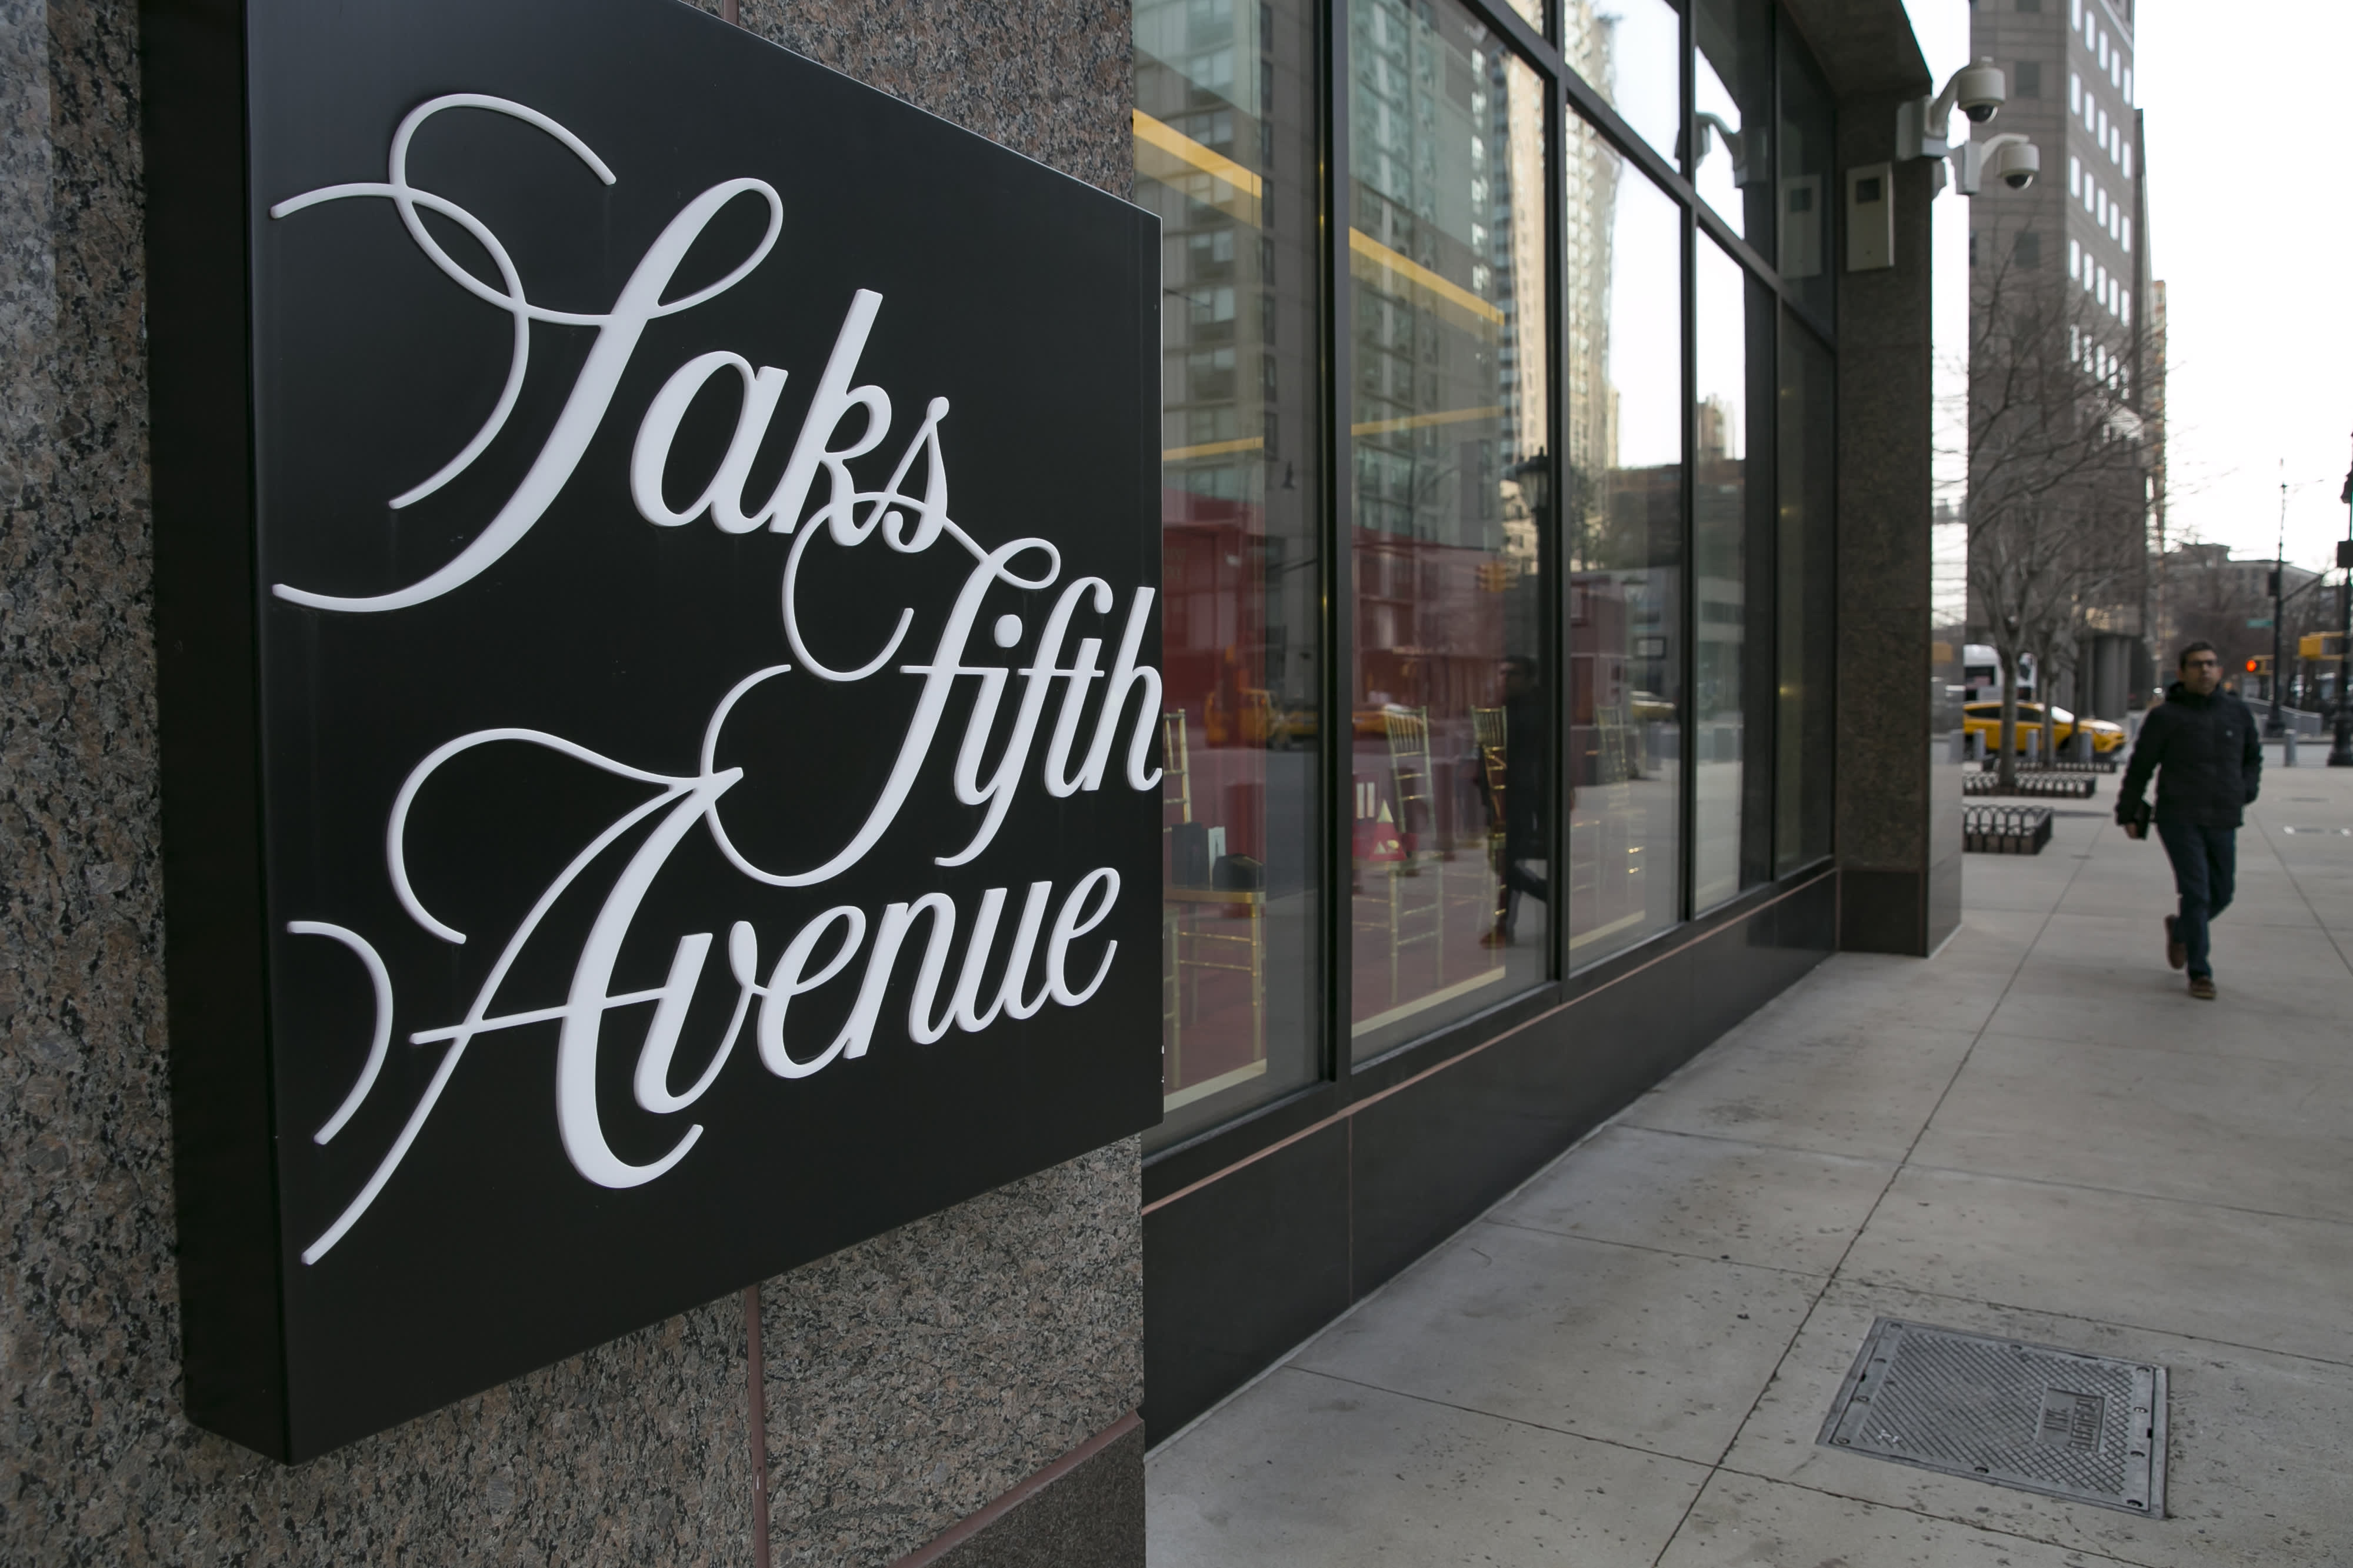 Saks Fifth Avenue chief aims to lure shoppers with 'the new luxury